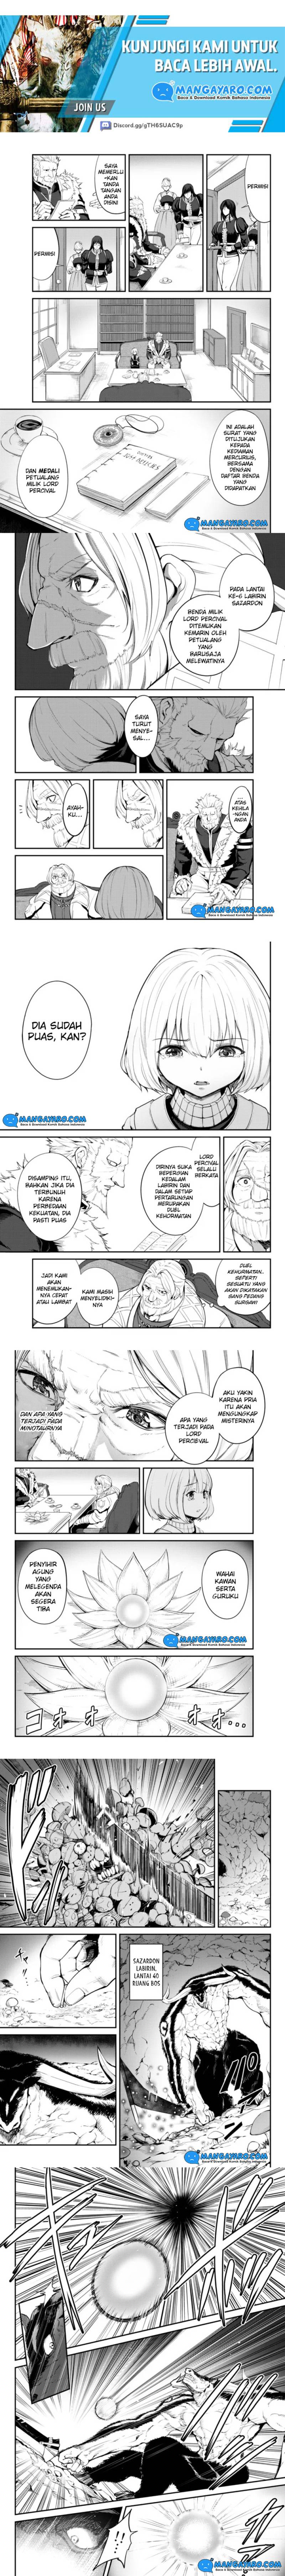 King Of The Labyrinth Chapter 08.2 - 29